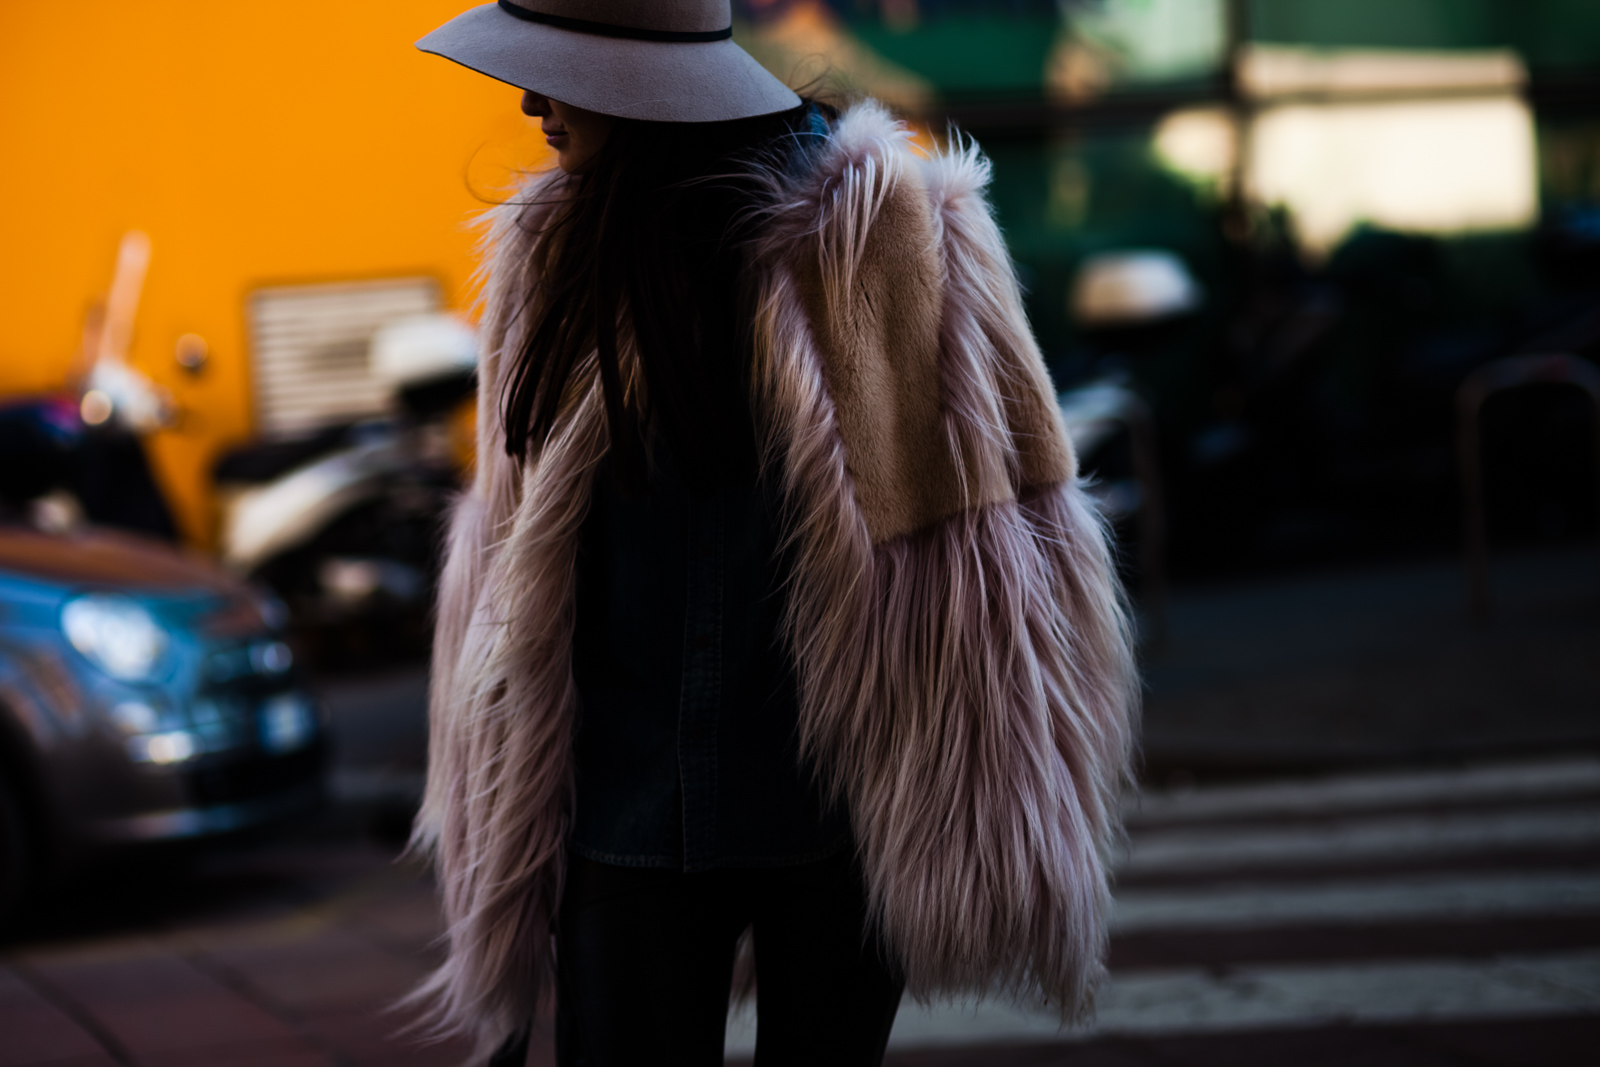 Woman wearing a fur jacket and a hat before the Giorgio Armani fashion show in Milan, Italy